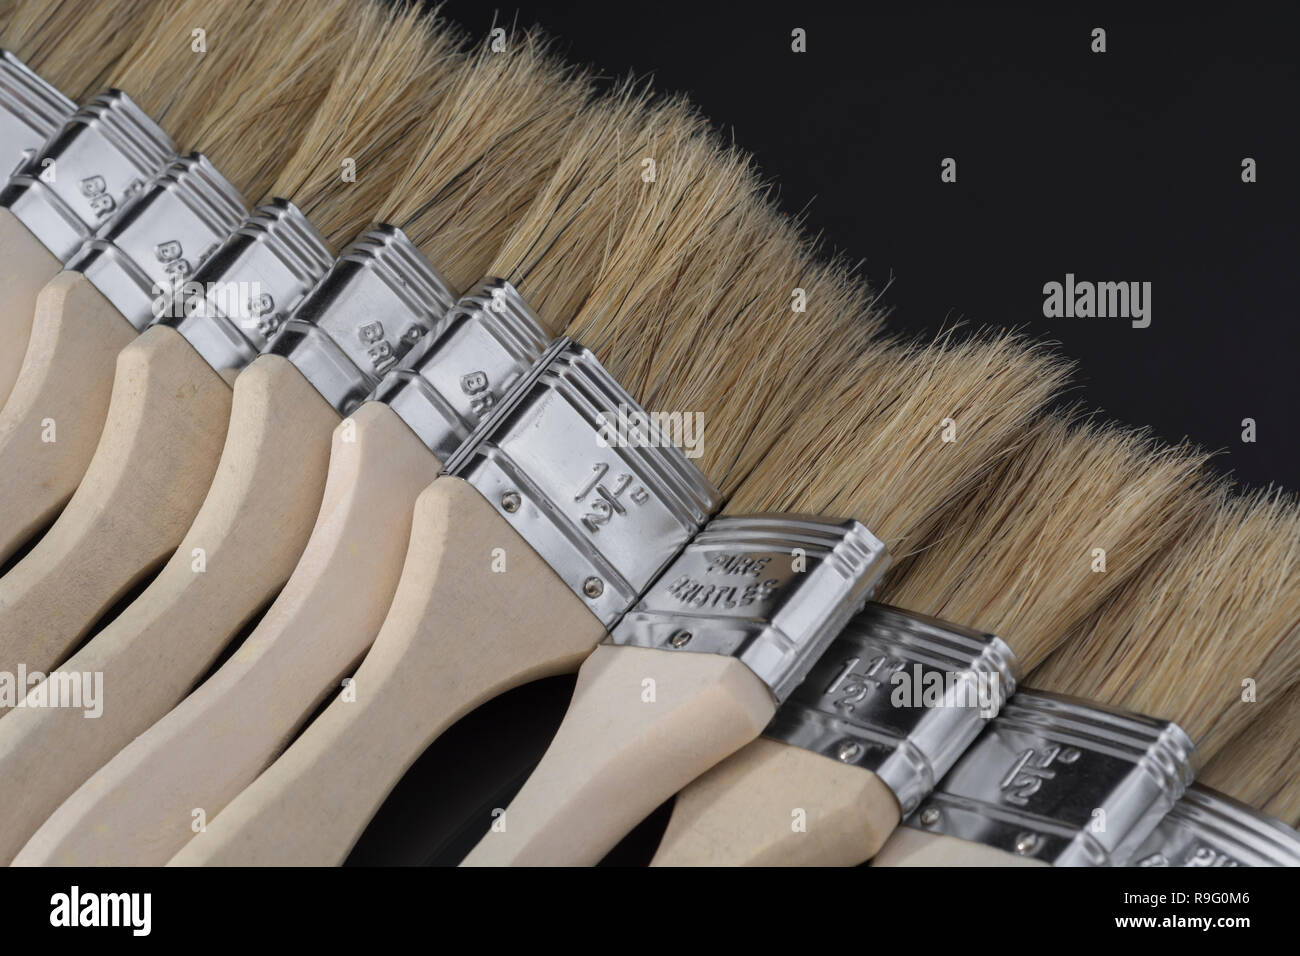 Close-up natural bristle wooden paintbrushes / paint brushes - metaphor for home decoration / decorating, painted in broad strokes, painting. Stock Photo